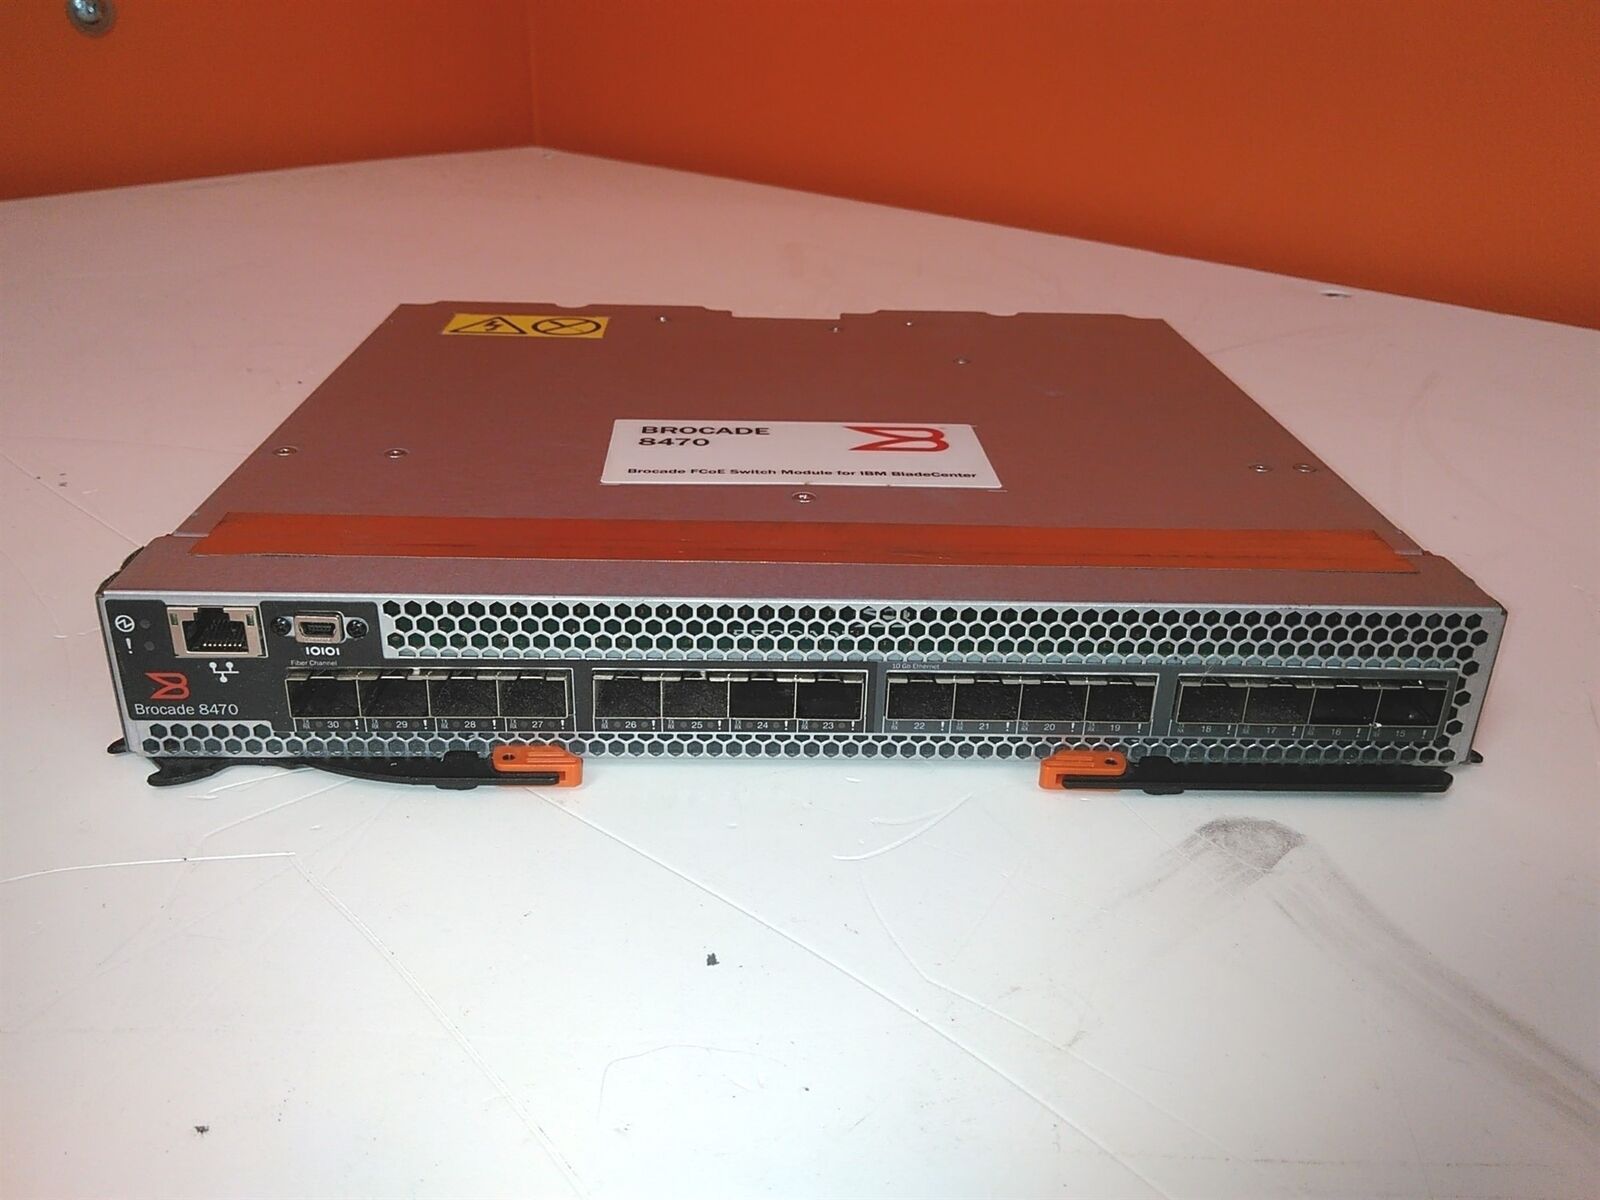 IBM Brocade 69Y1911 8470 Converged 10GbE Switch Module Defective AS-IS